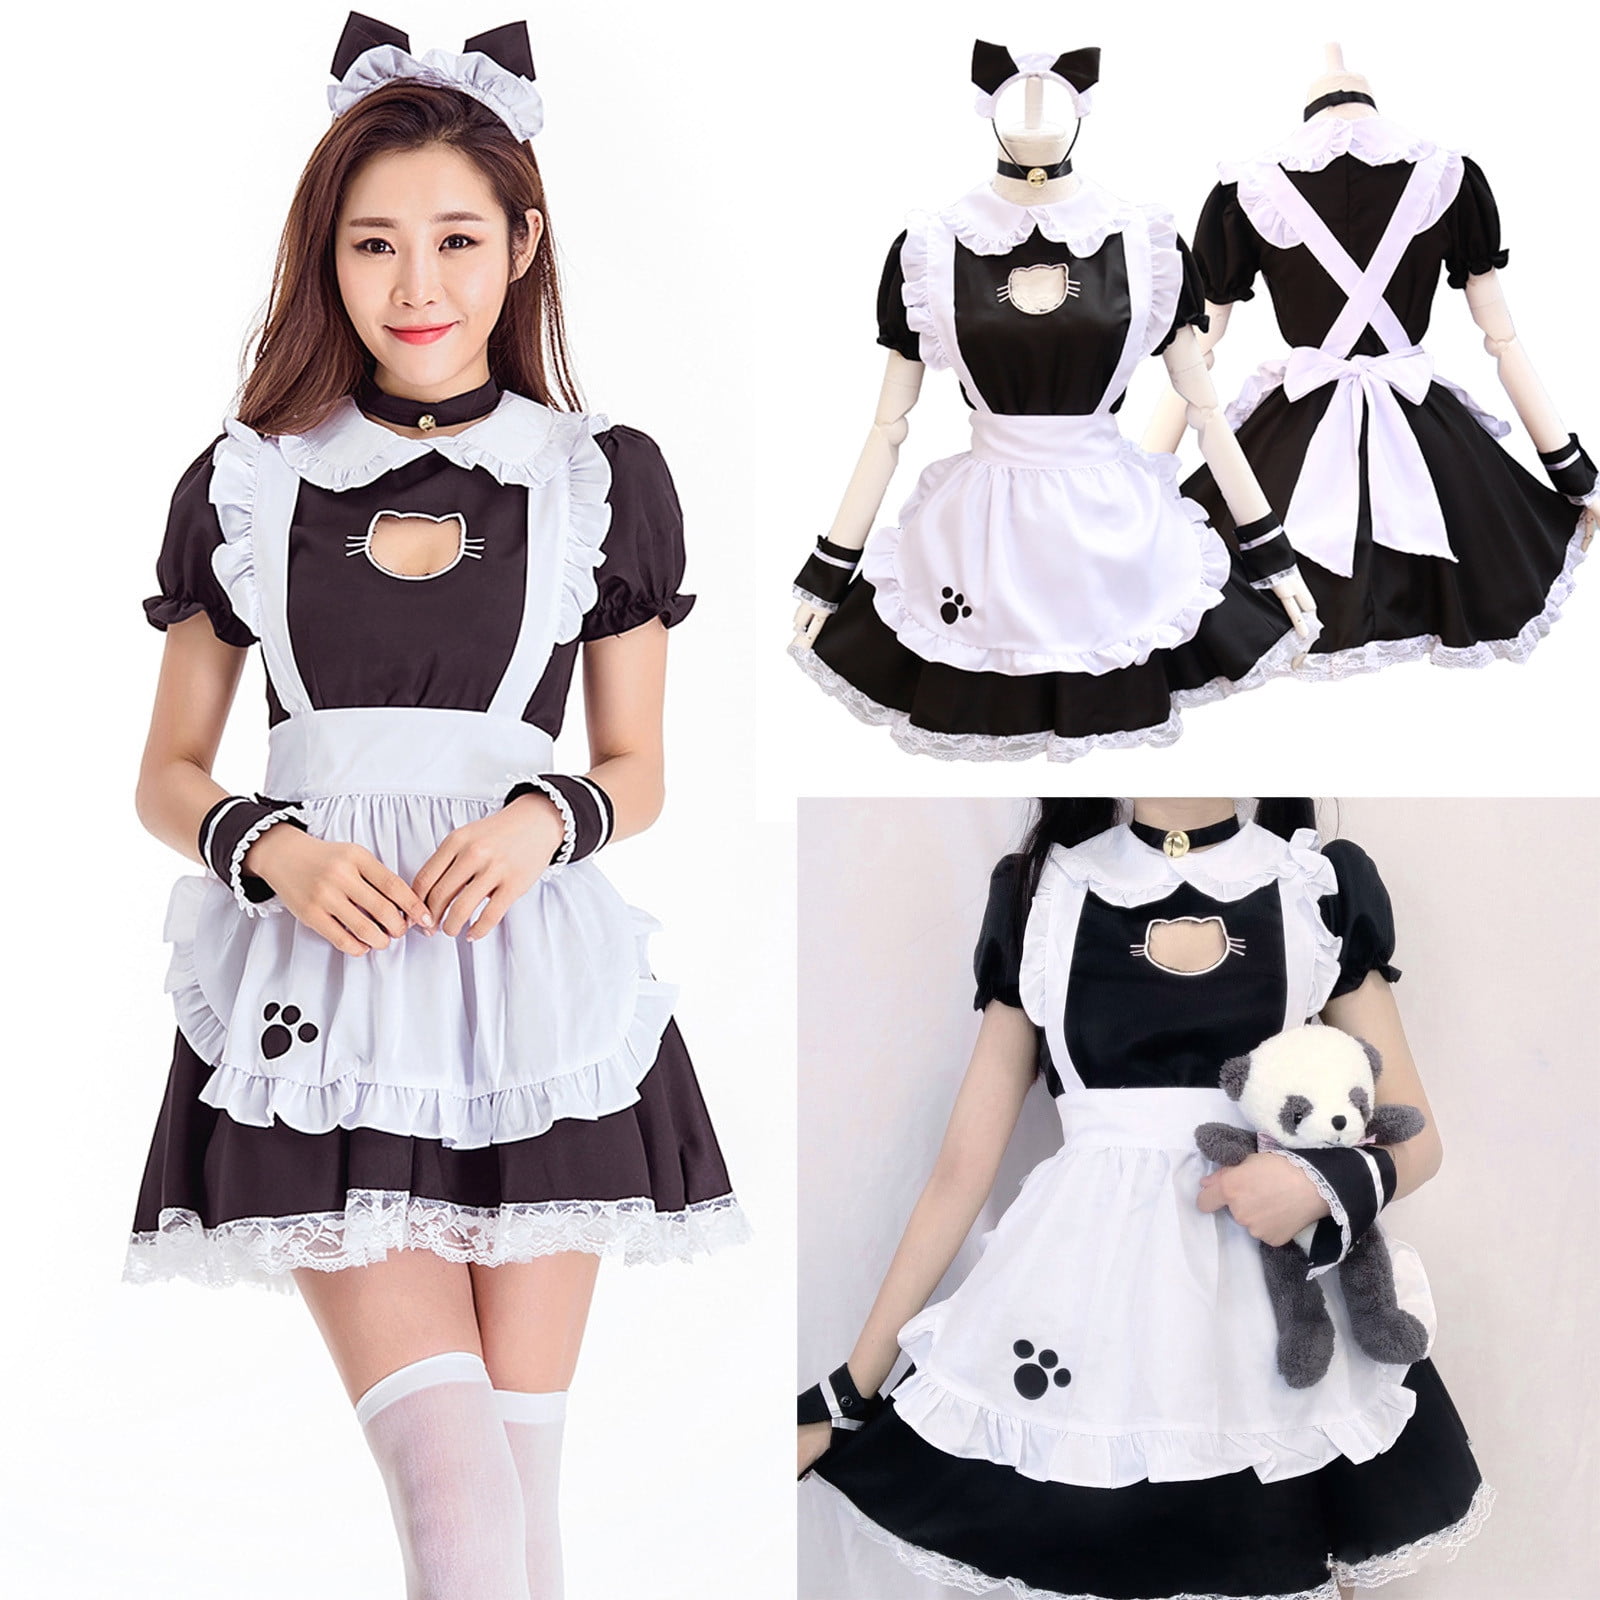 abort parity the purpose Aimik Japanese Maid Outfit Cosplay Outfits Anime with Animation Costumes  Accessories for Women Sweet Classic Lolita Fancy Apron Dress Crossdress  Dresses - Walmart.com